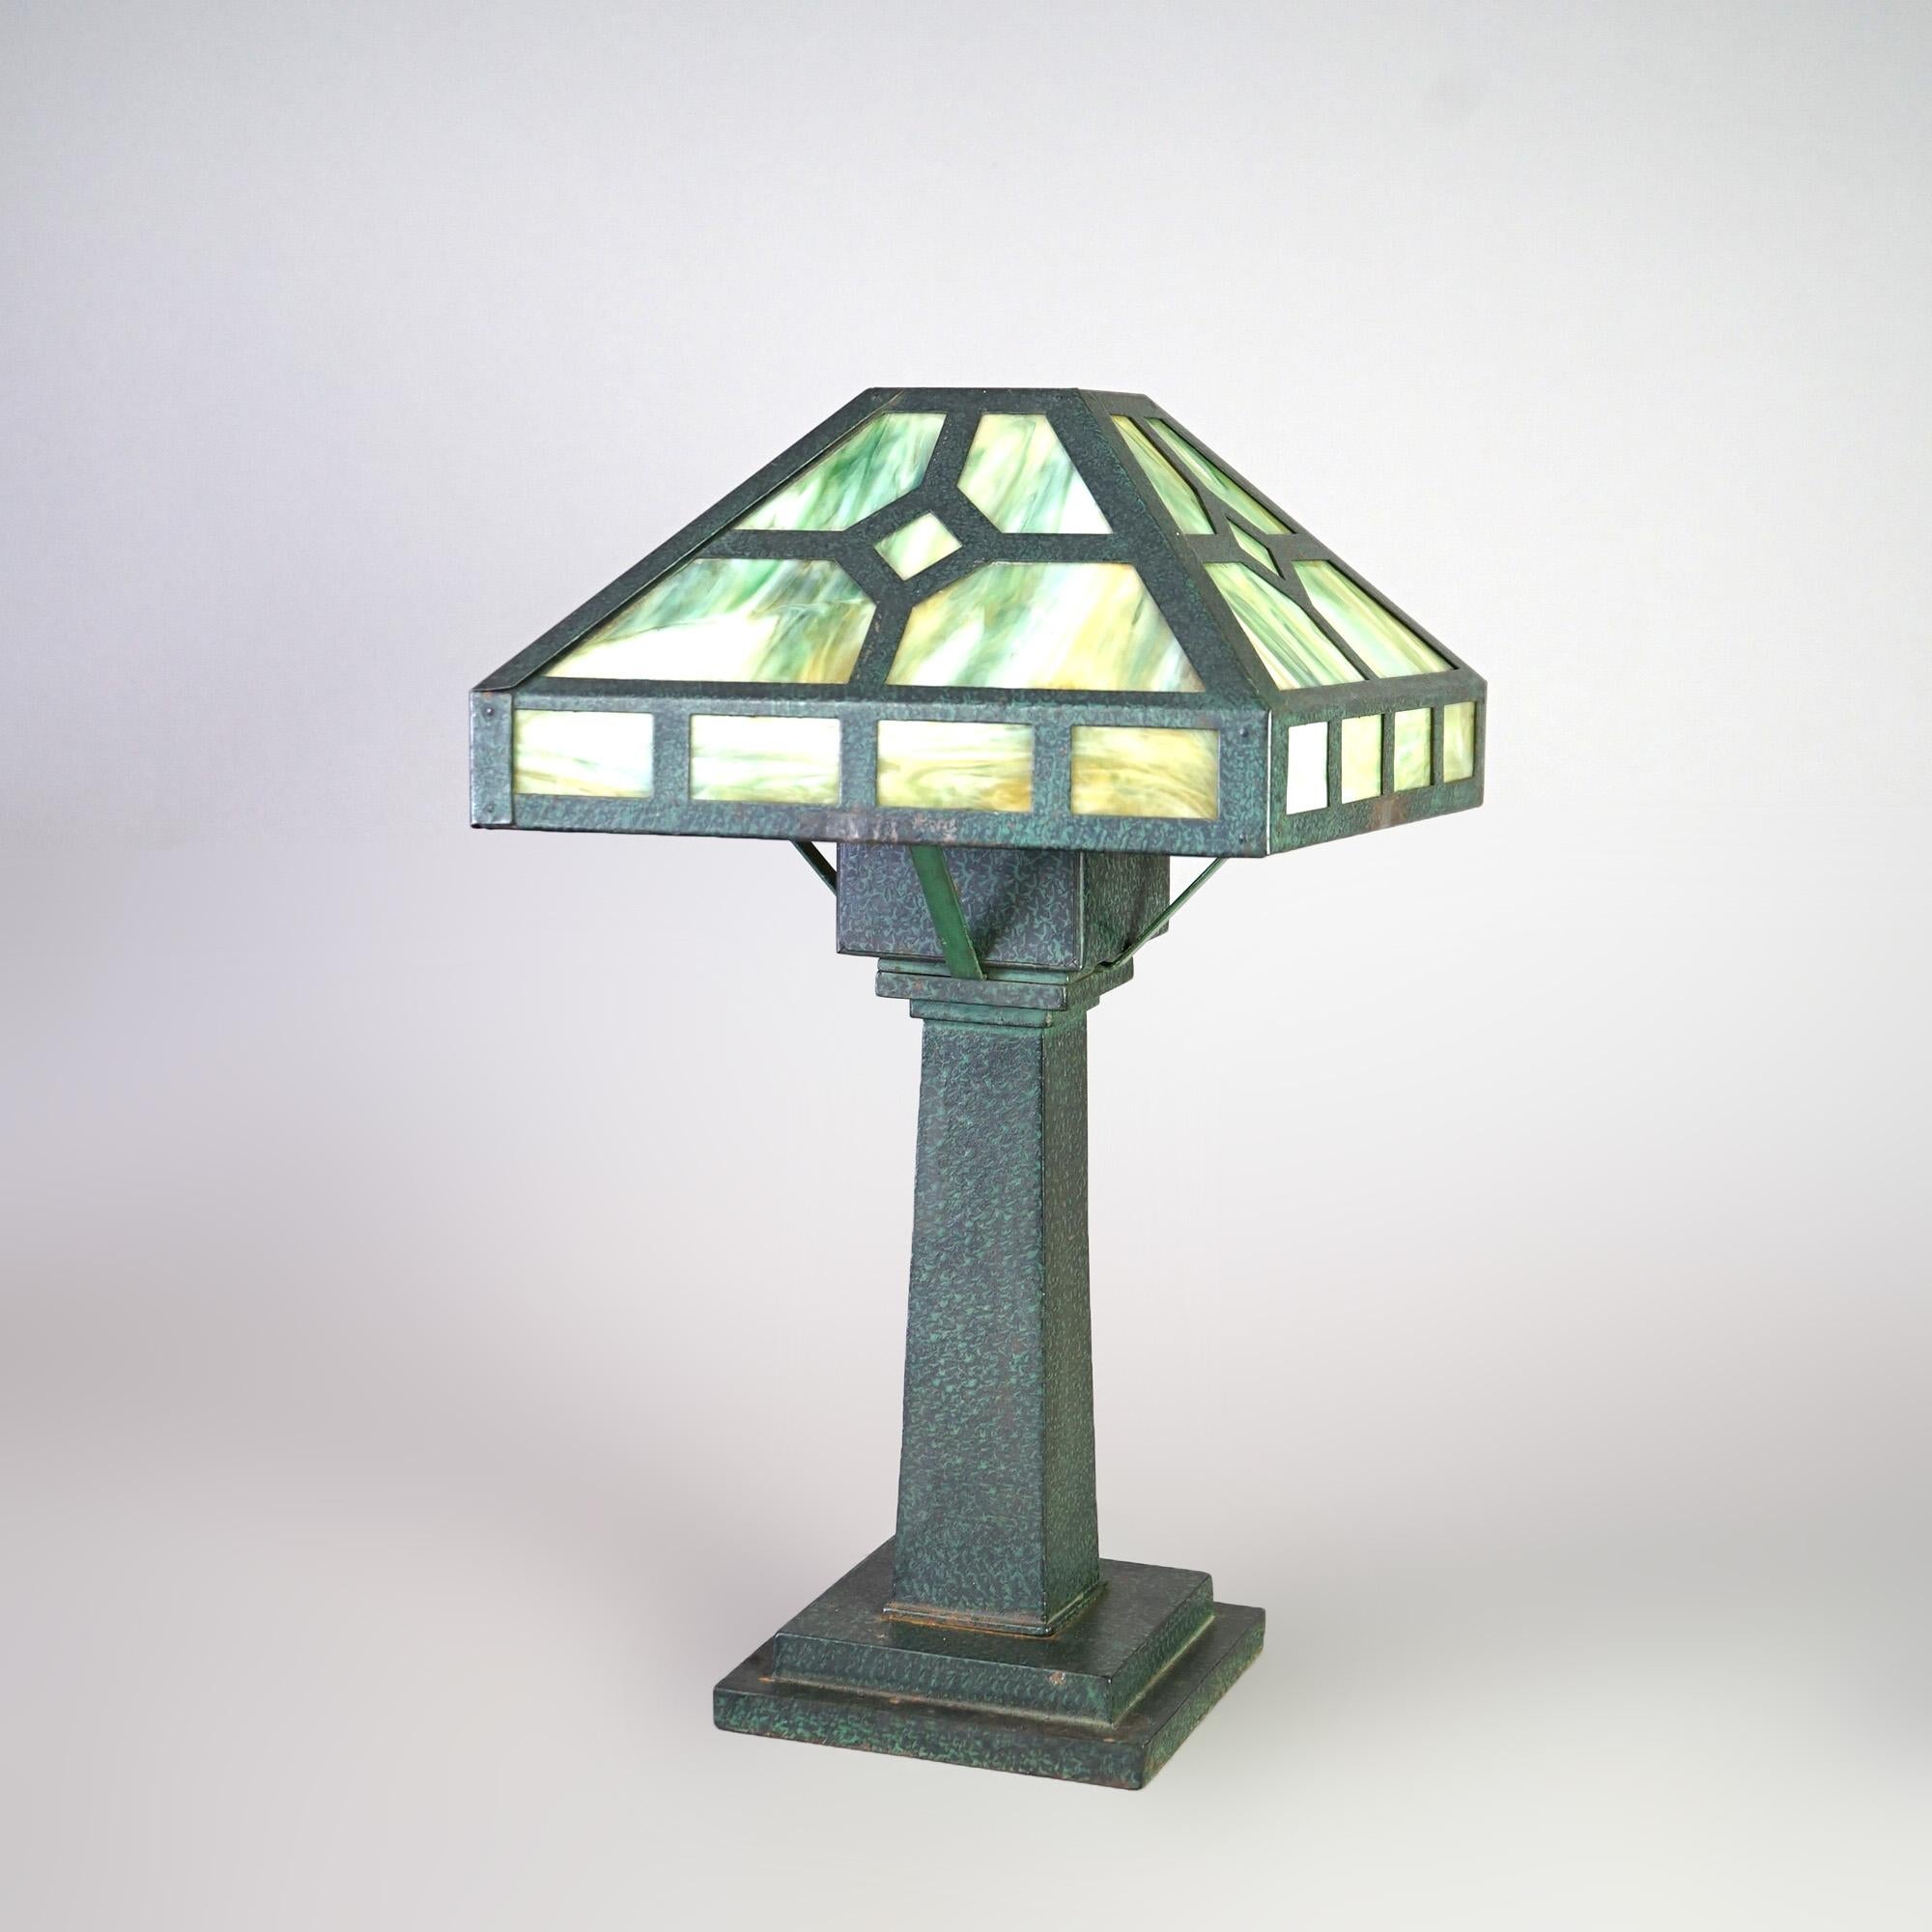 An Arts and Crafts Mission Prairie style table lamp offers verdigris single socket base with shade having slag glass panels, c1910

Measures - 20.5